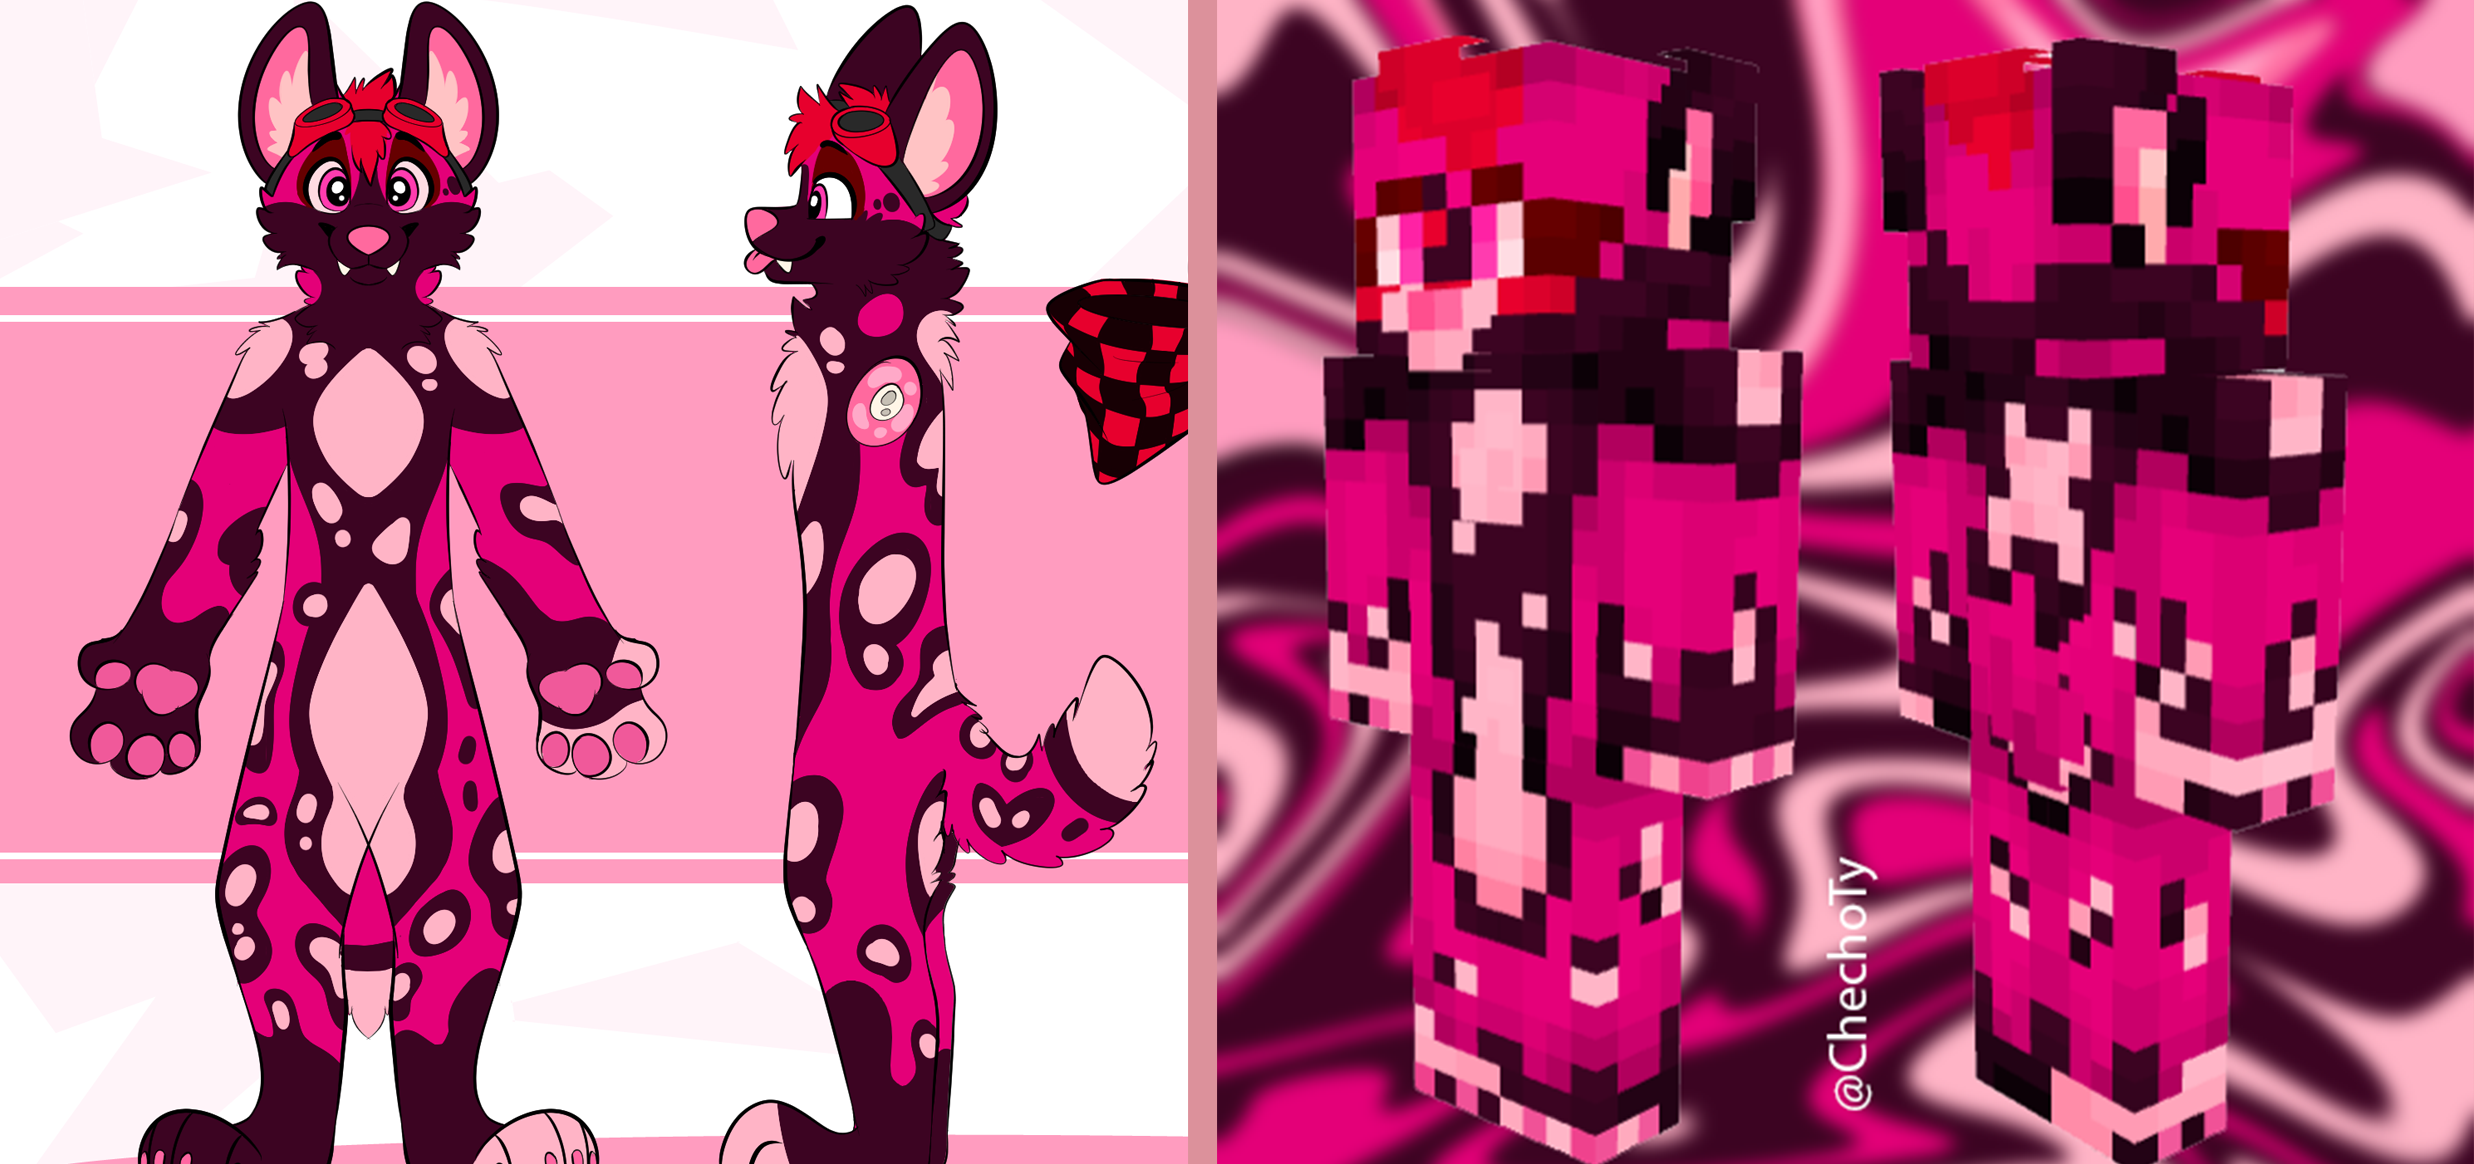 mmochiioo heres an updated skin rendering tutorial! Featuring